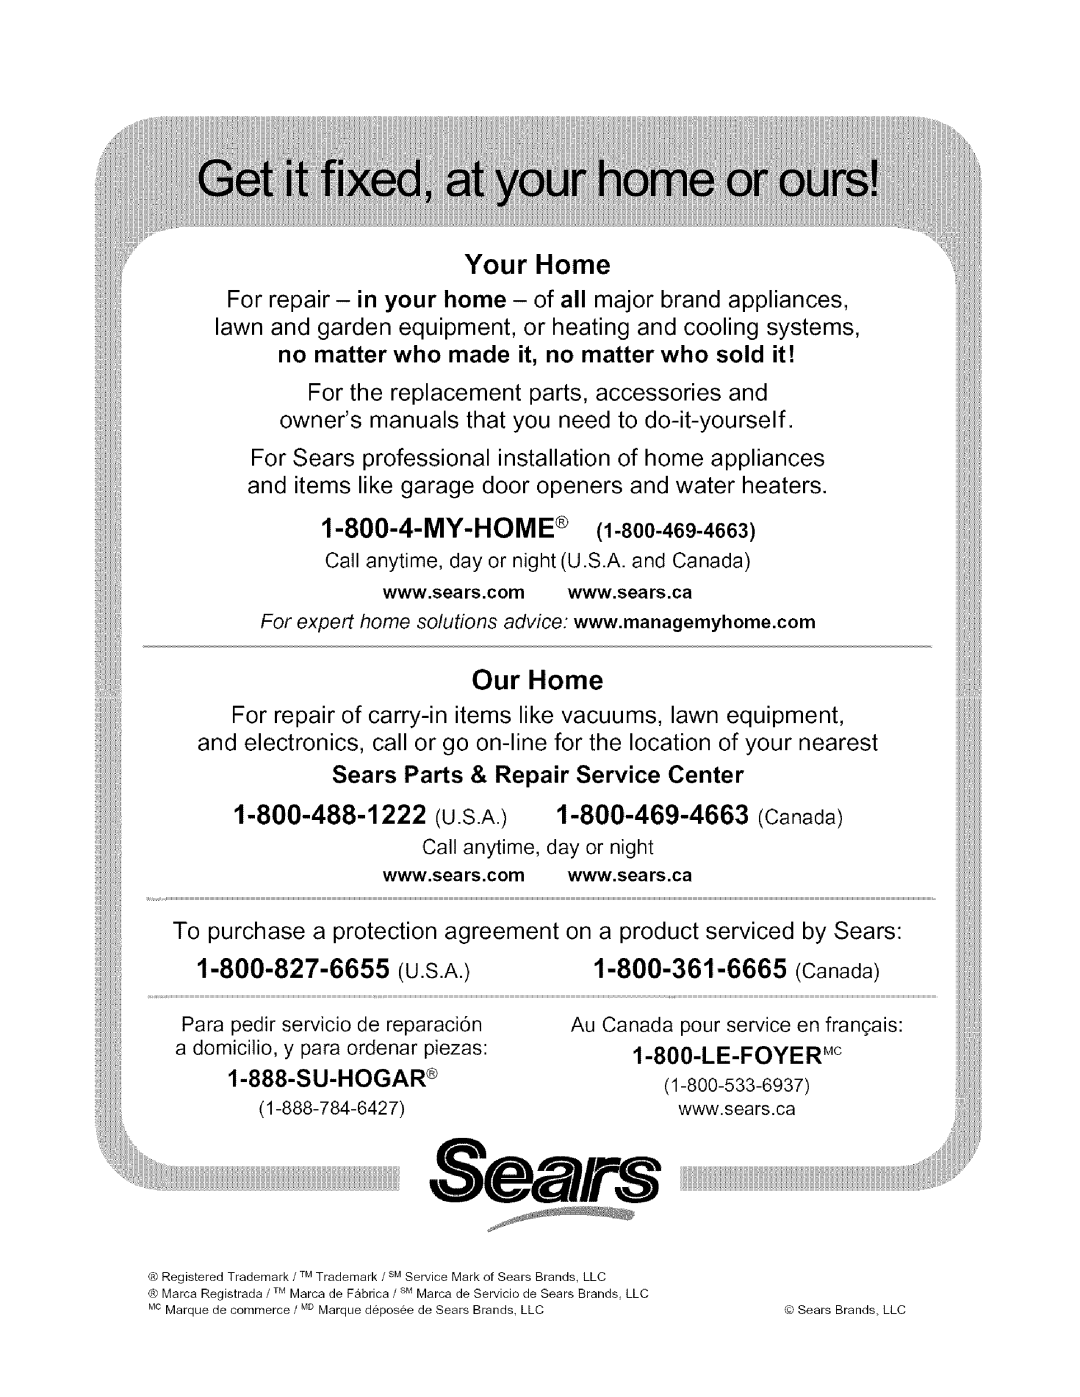 Kenmore 790, 4272 manual Your Home, Our Home, Sealrs 